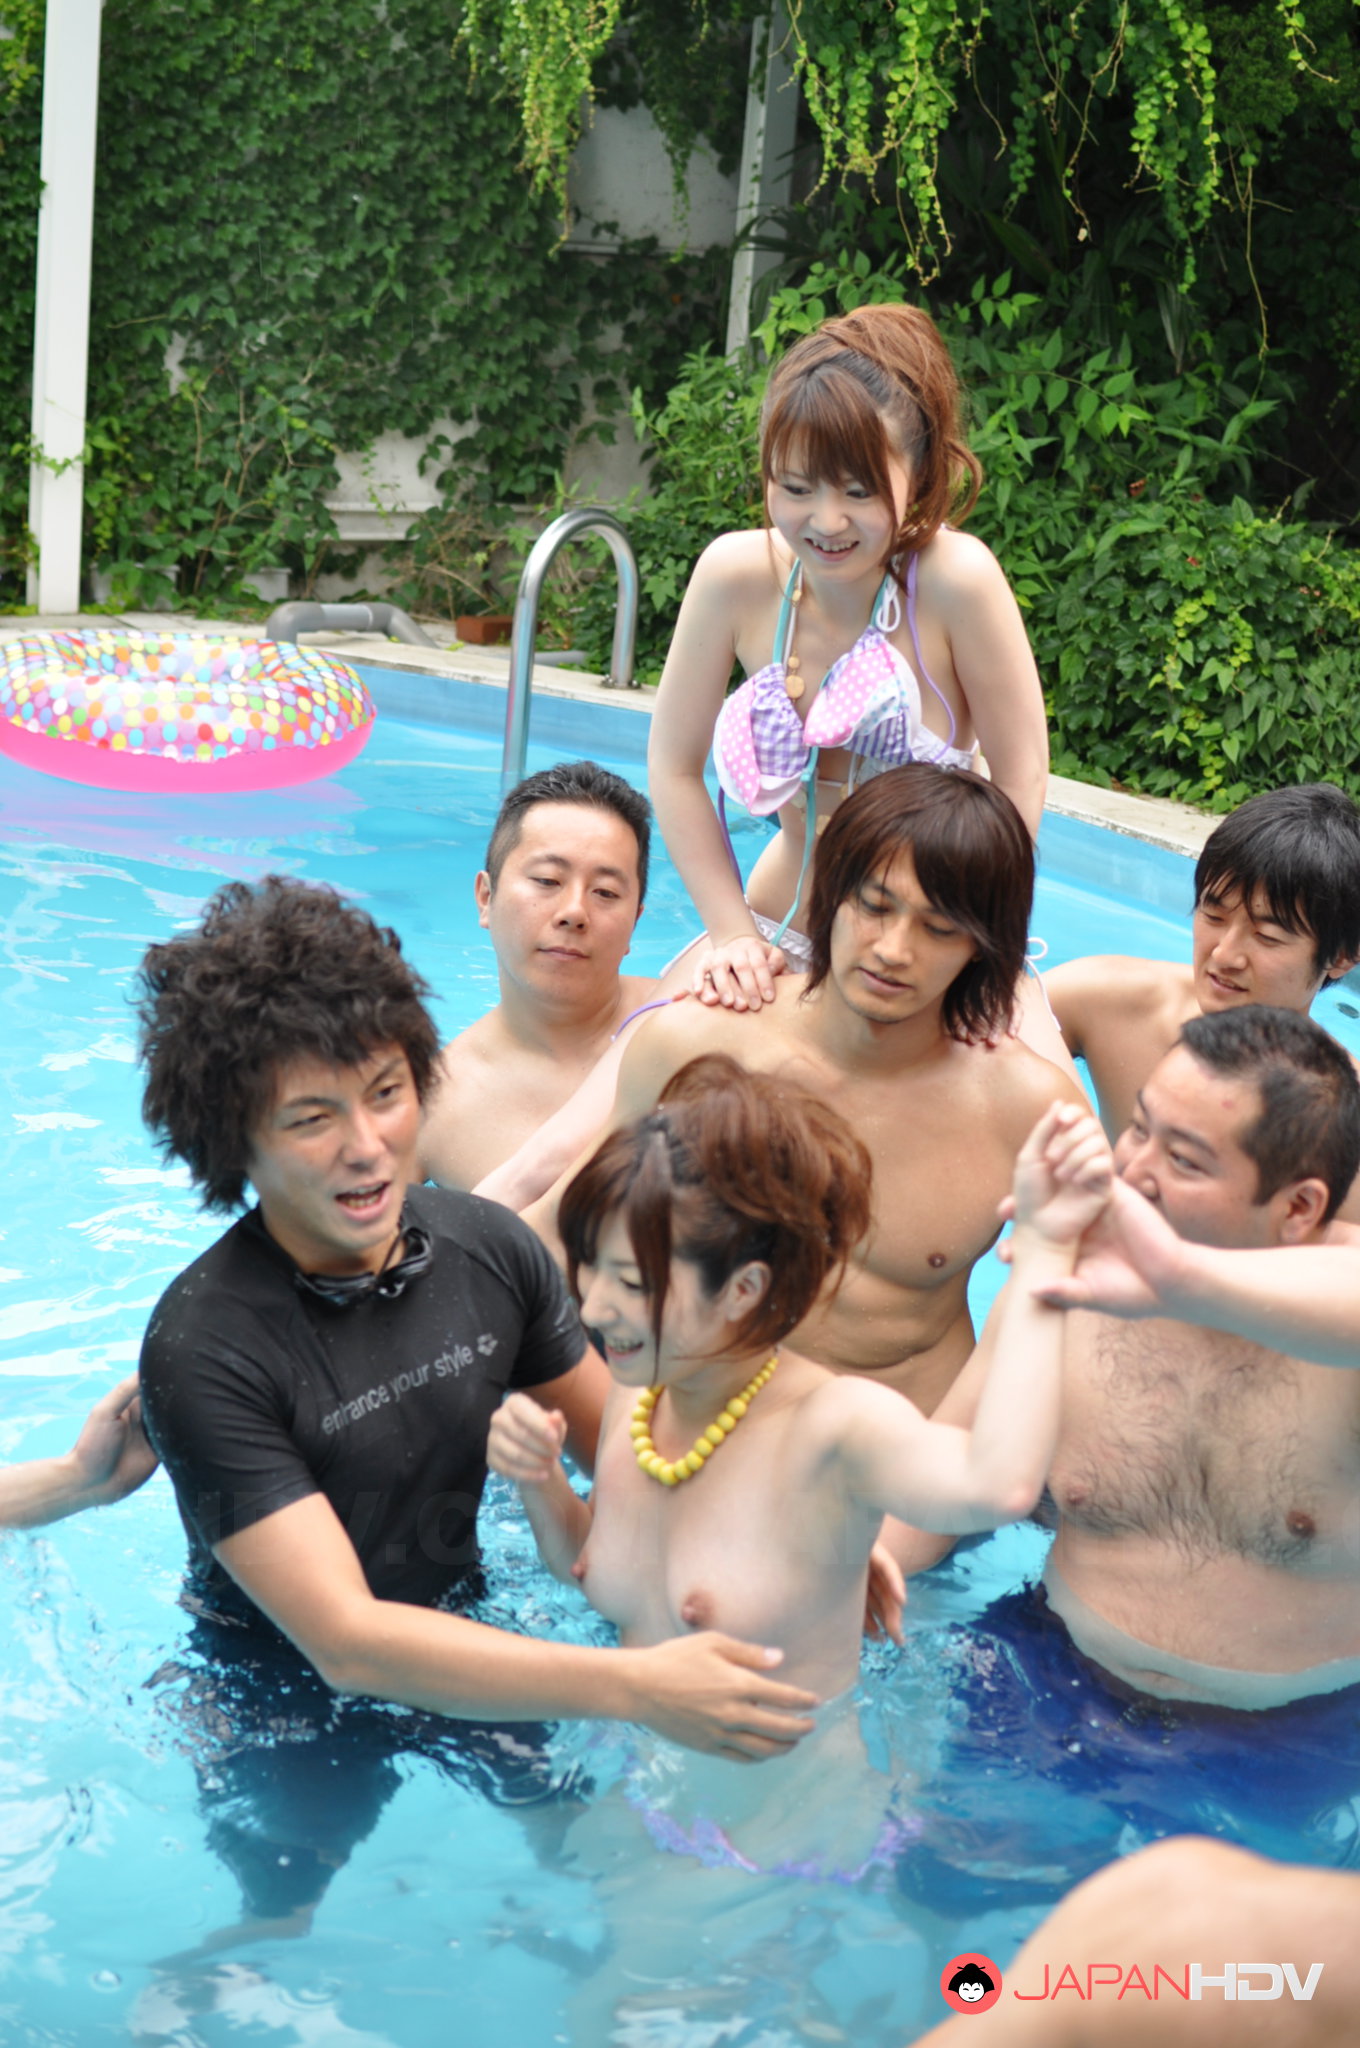 Japanese Naked Parties - Japanese girls enjoy in some sexy pool party